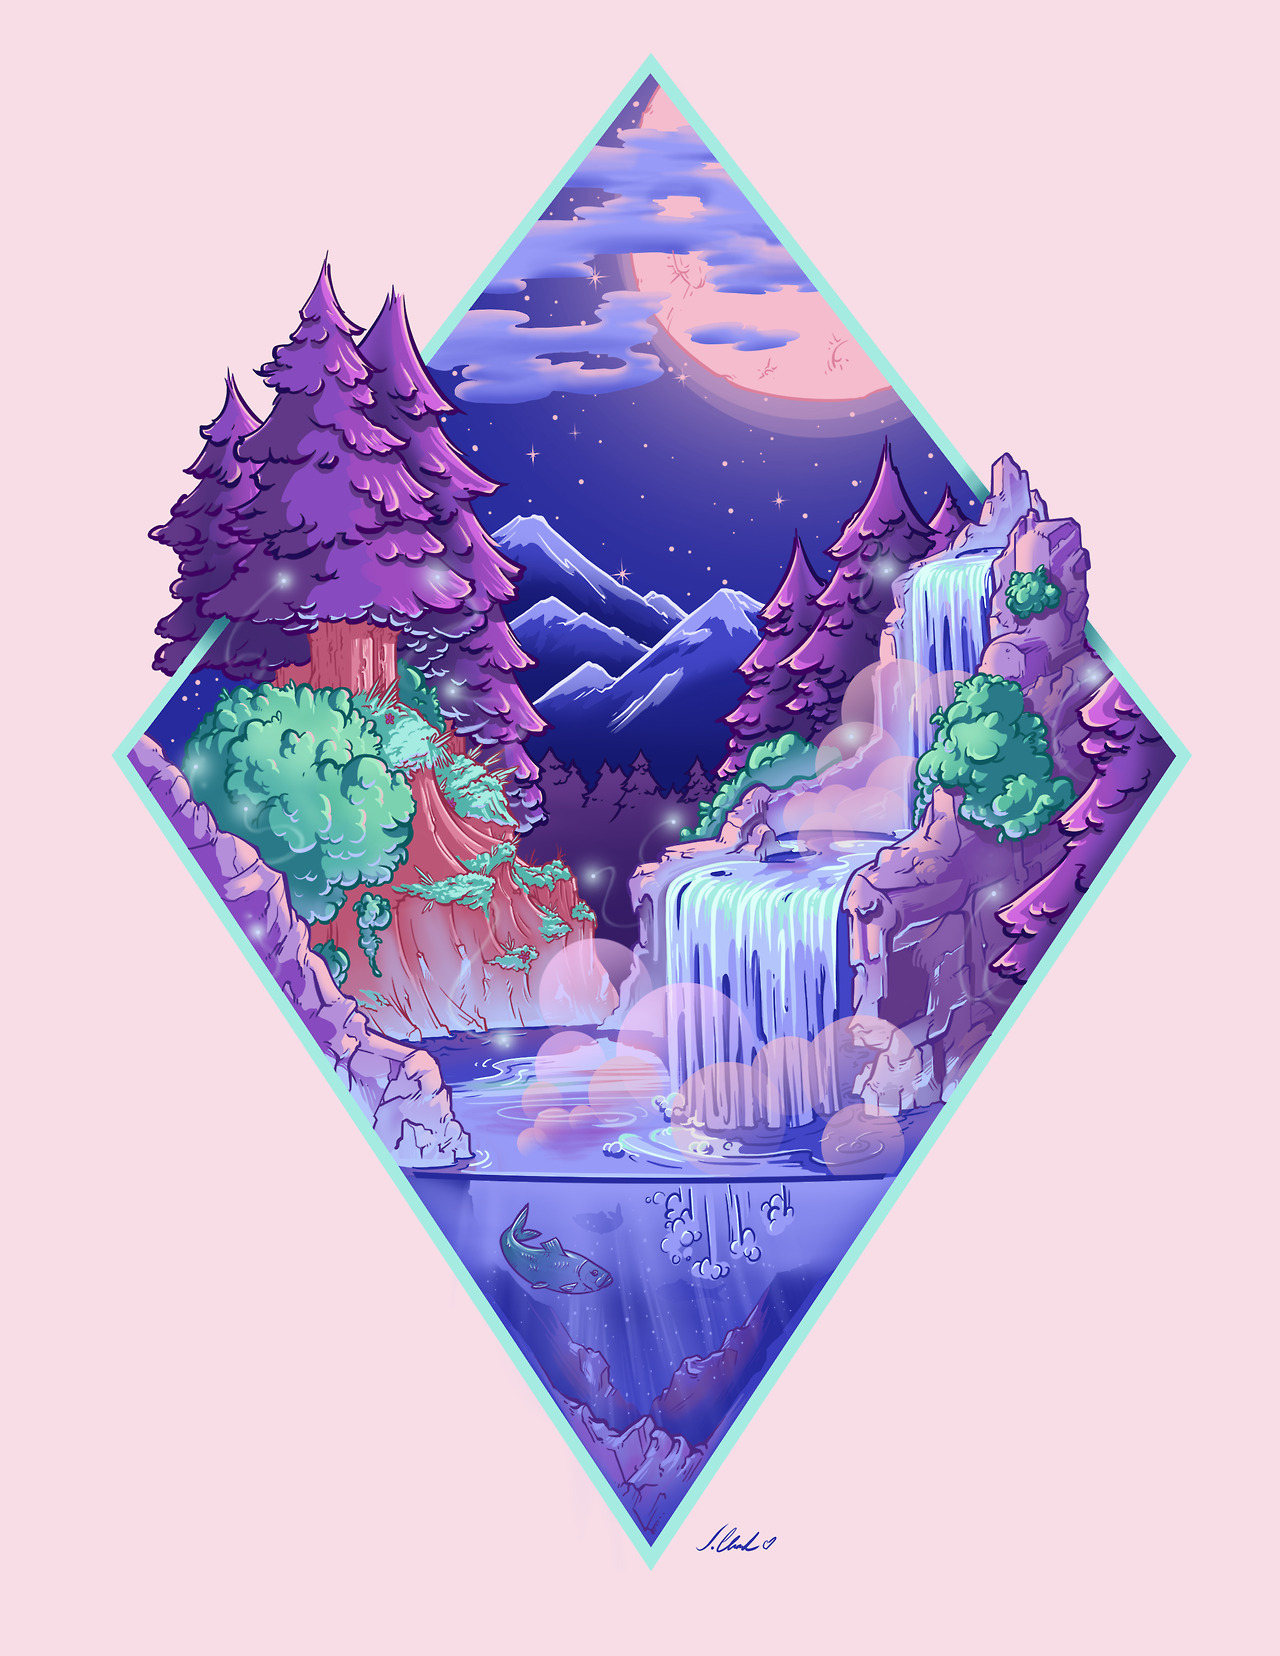 Diamond Night Where geometric meets Nature. Joe Clark Art Check out more! Facebook│Instagram — Immediately post your art to a topic and get feedback. Join our new community, EatSleepDraw Studio, today!